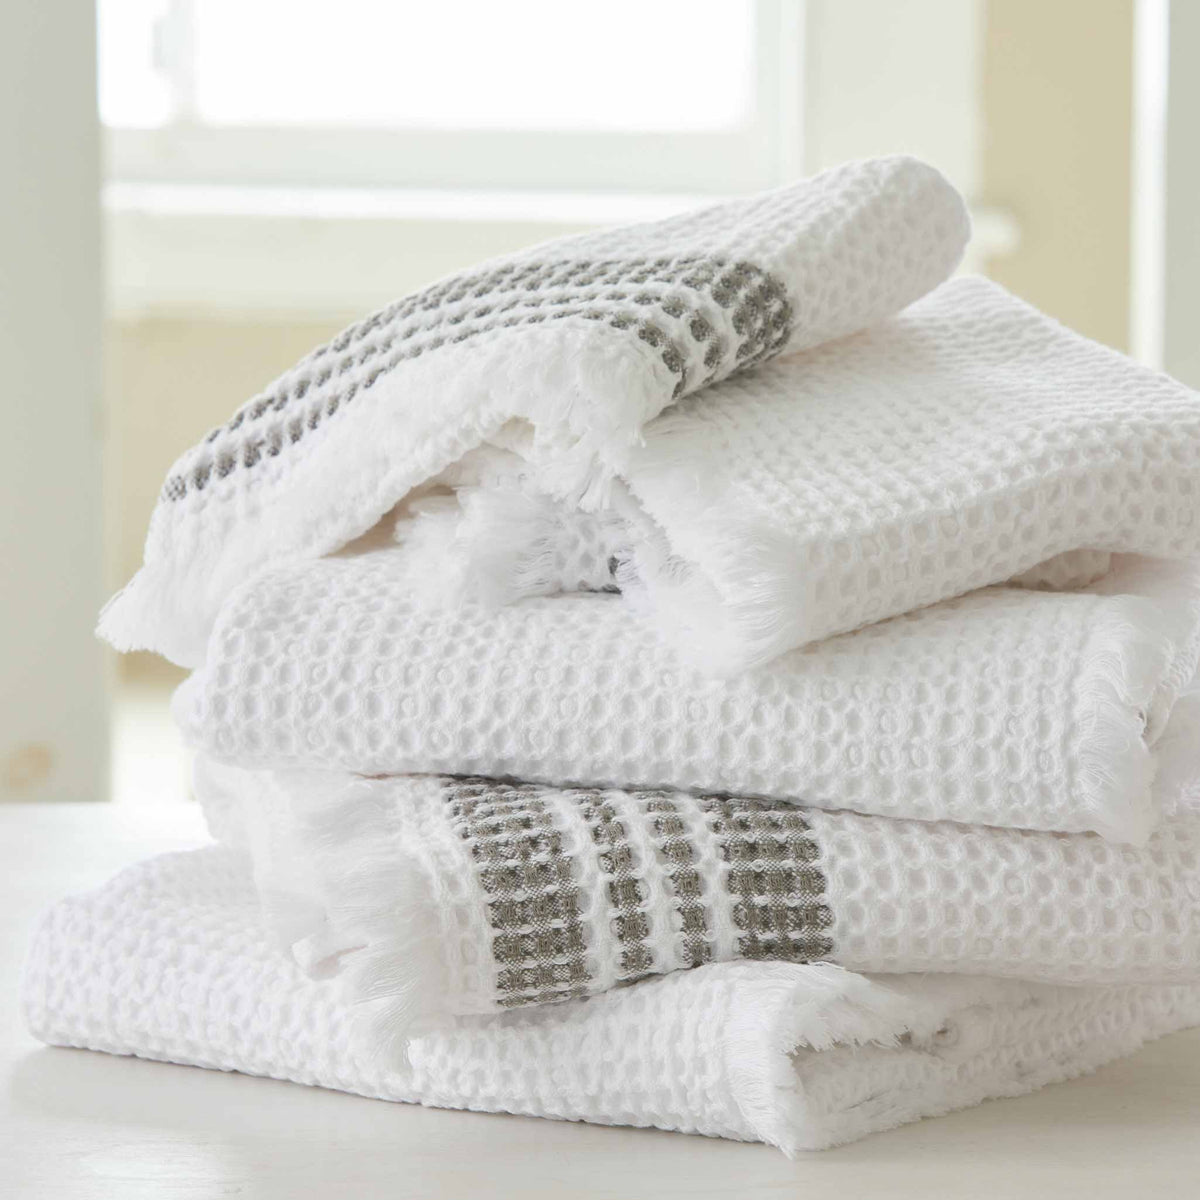 HANDWOVEN GIANT WAFFLE TOWELS-WHITE with GREY STRIPES